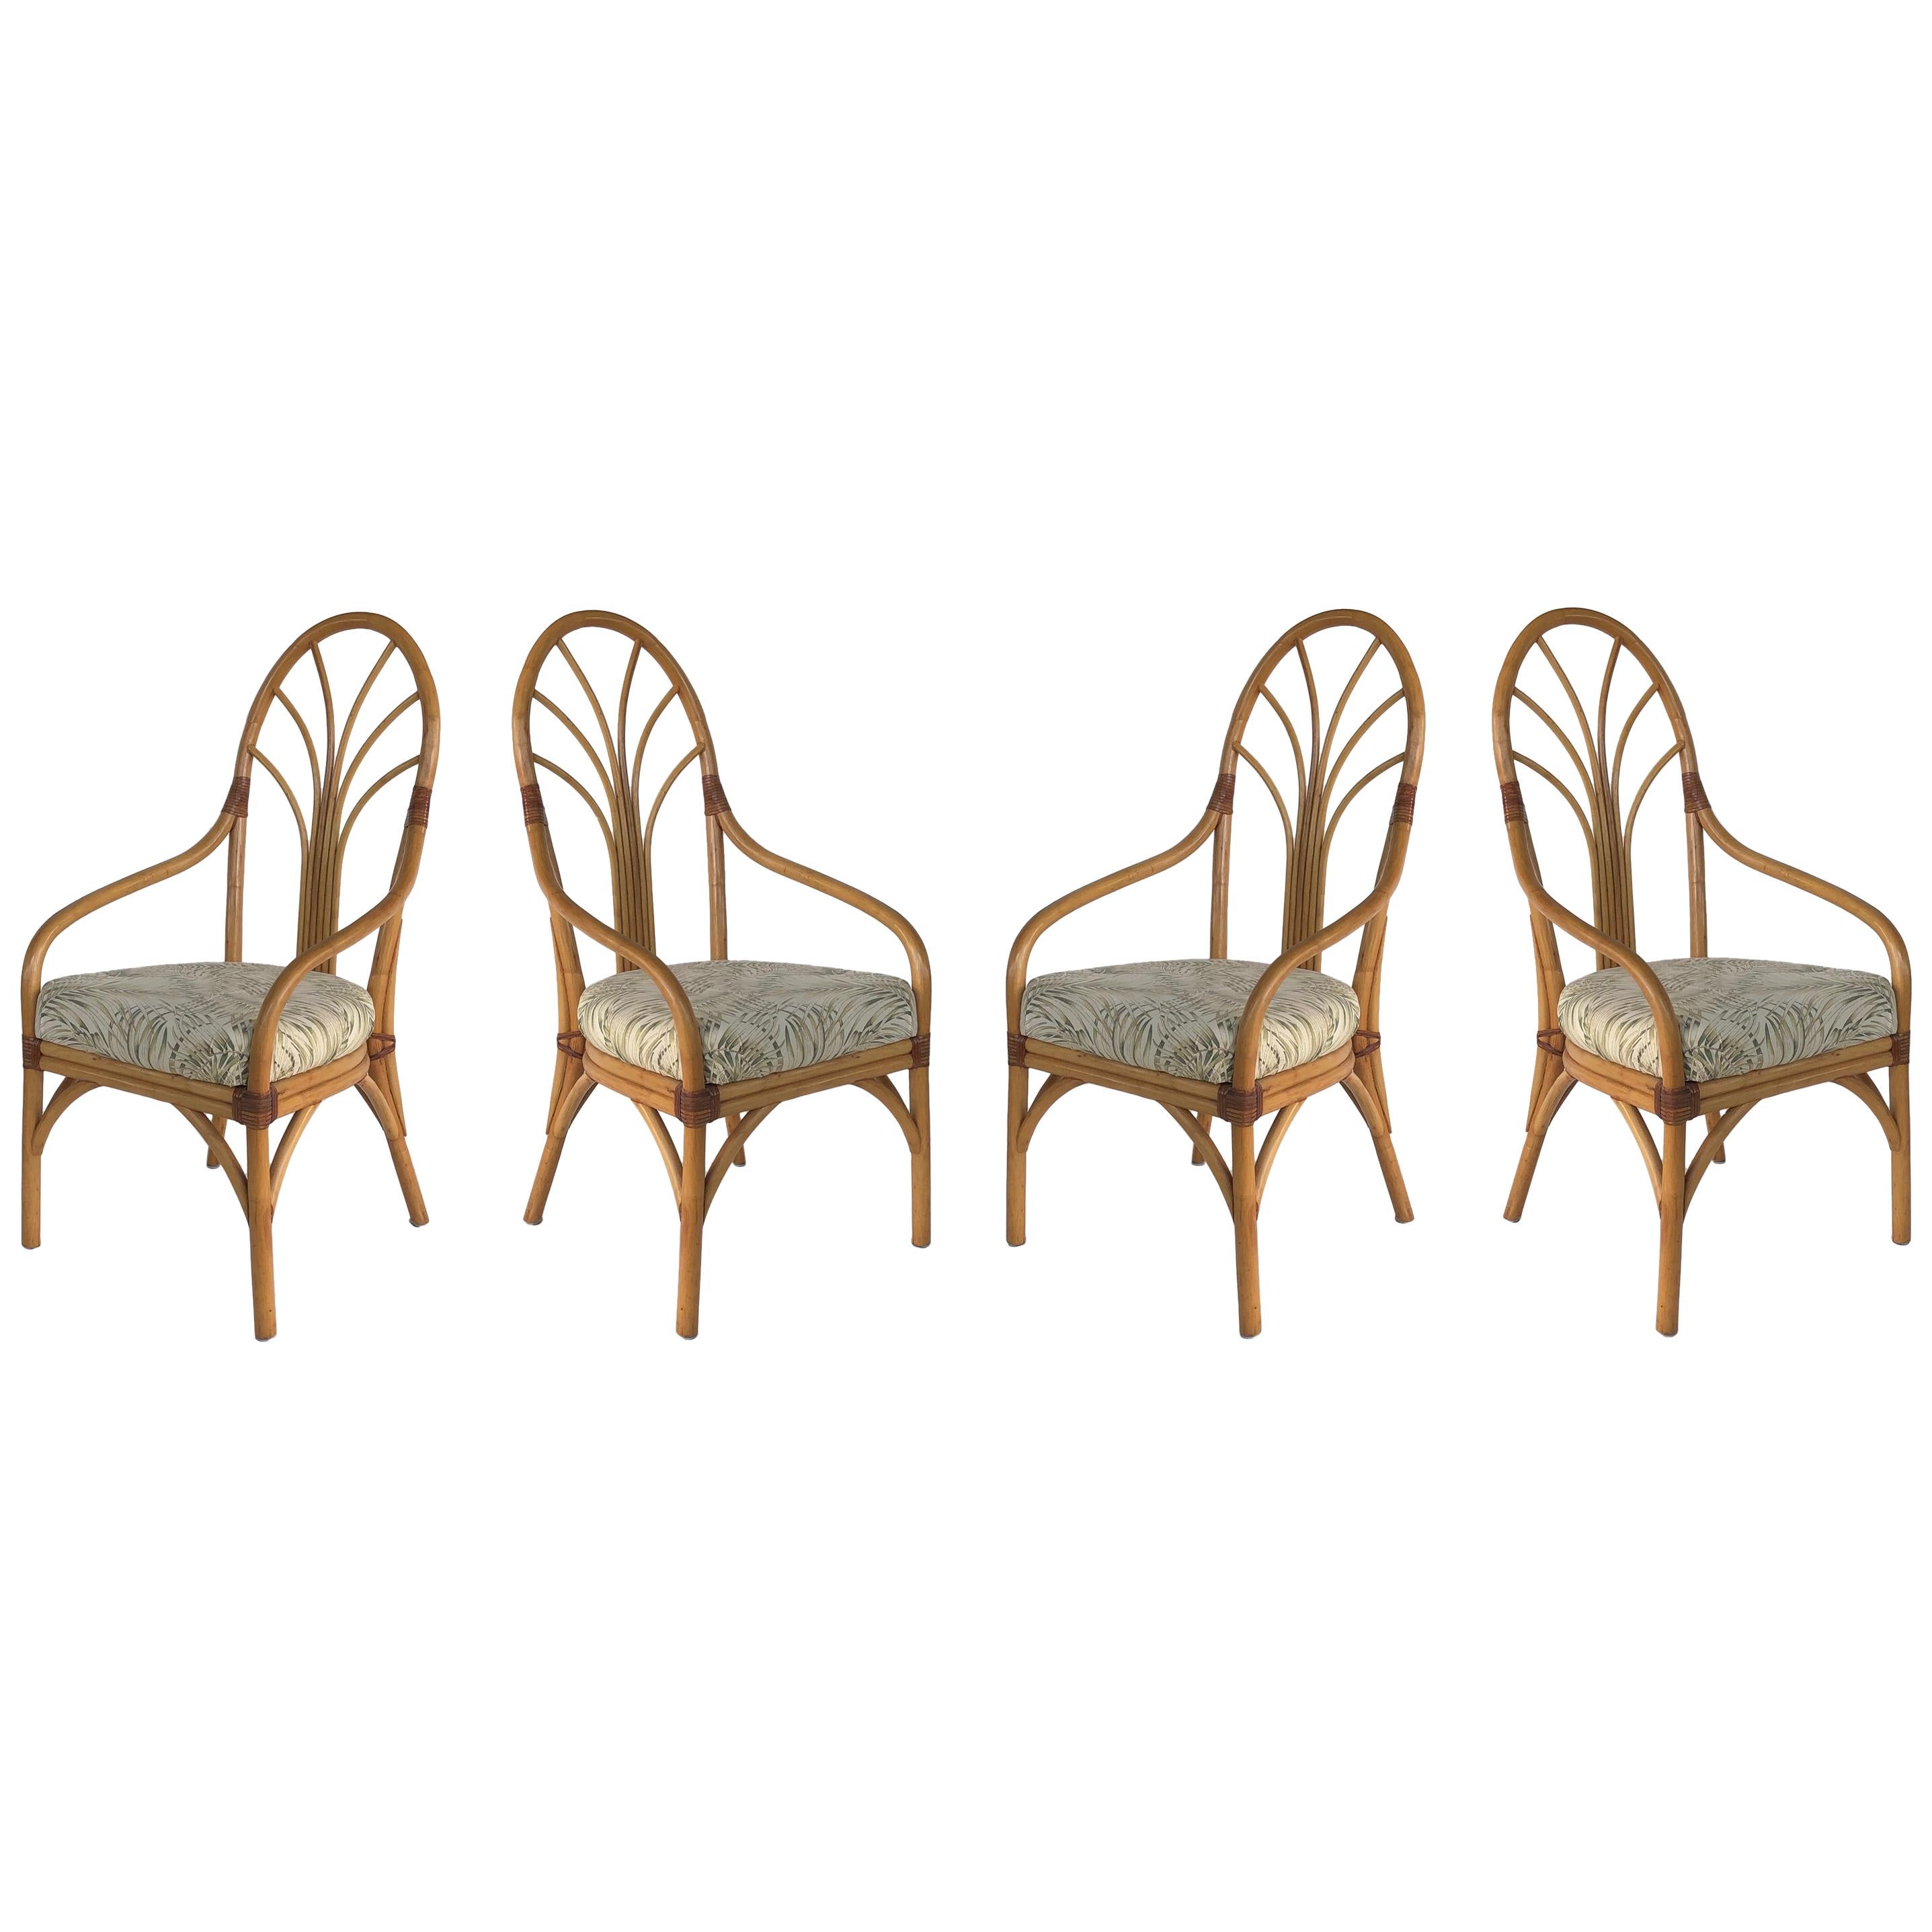 Vintage Tropical Bent Rattan Dining Armchairs/Chairs, Set of 4